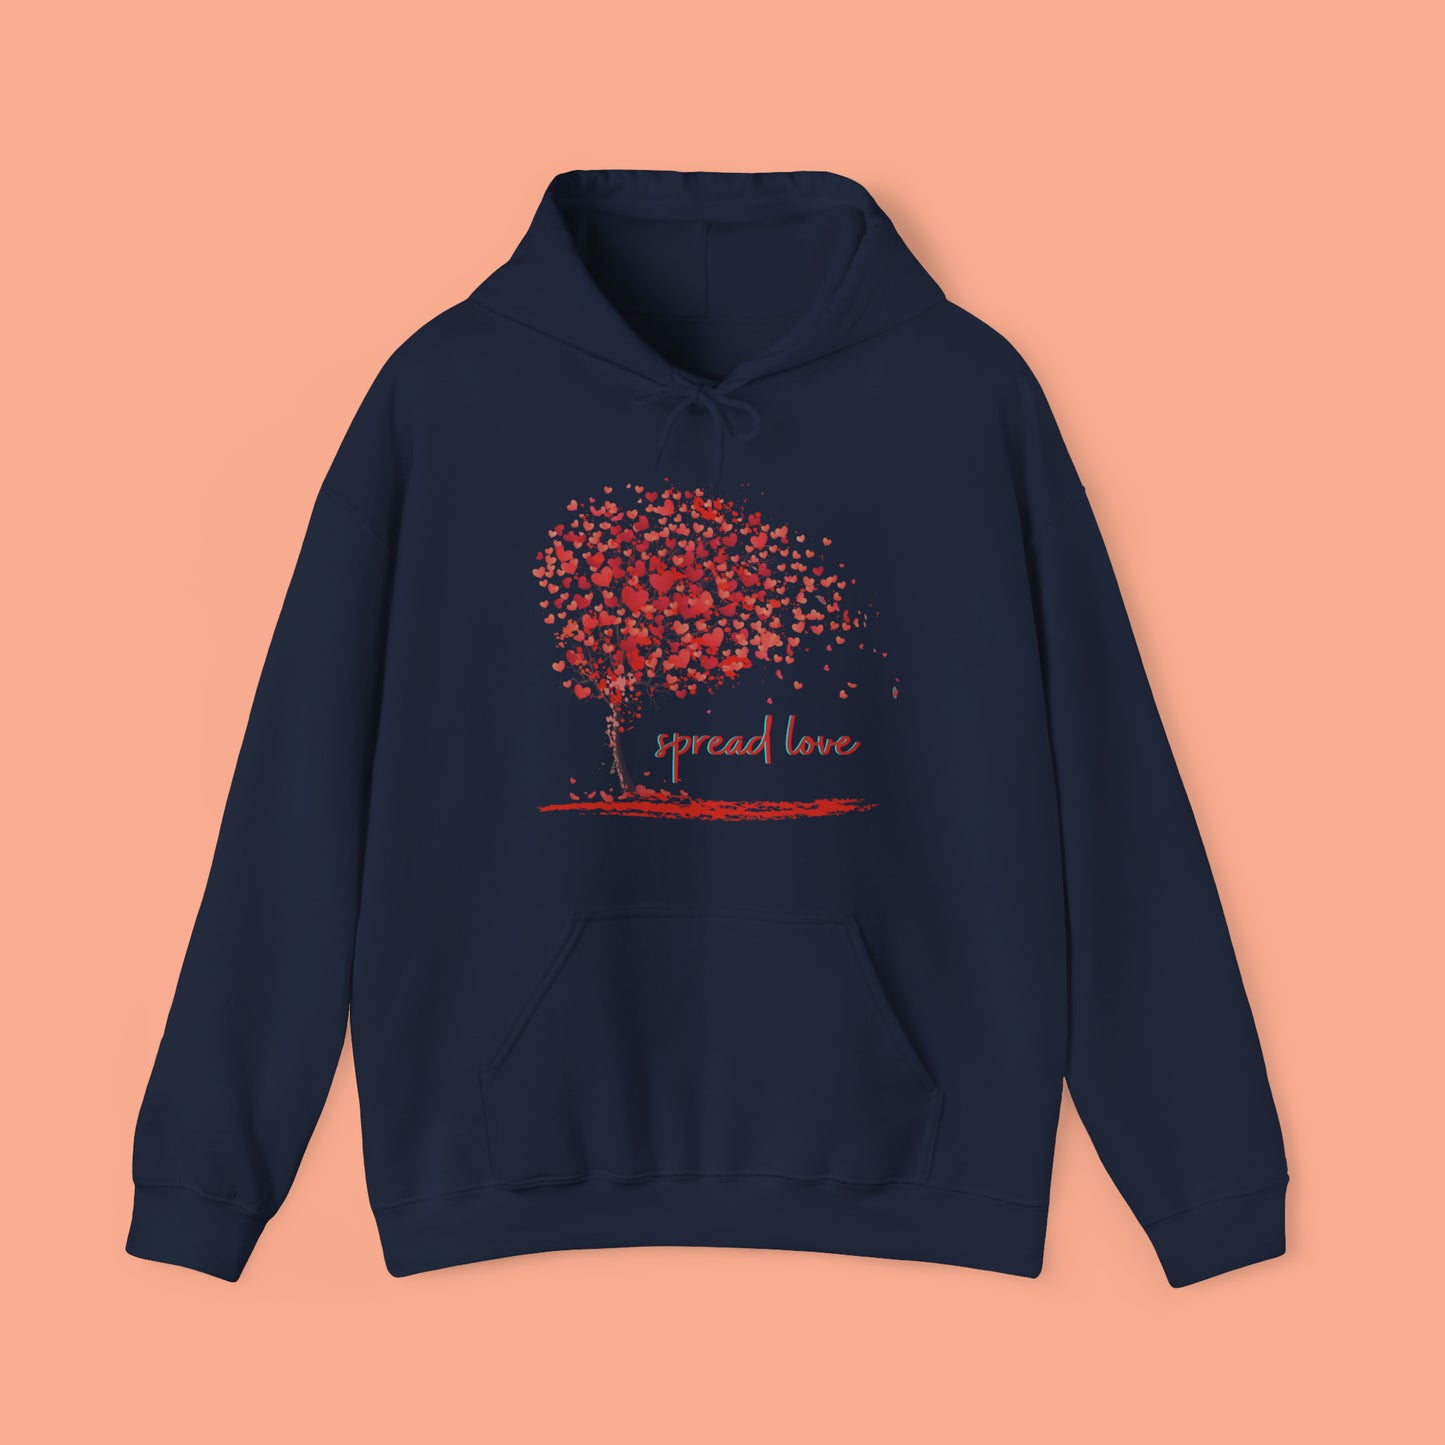 Spread love is the message on this heart filled tree designed Unisex Heavy Blend™ Hooded Sweatshirt